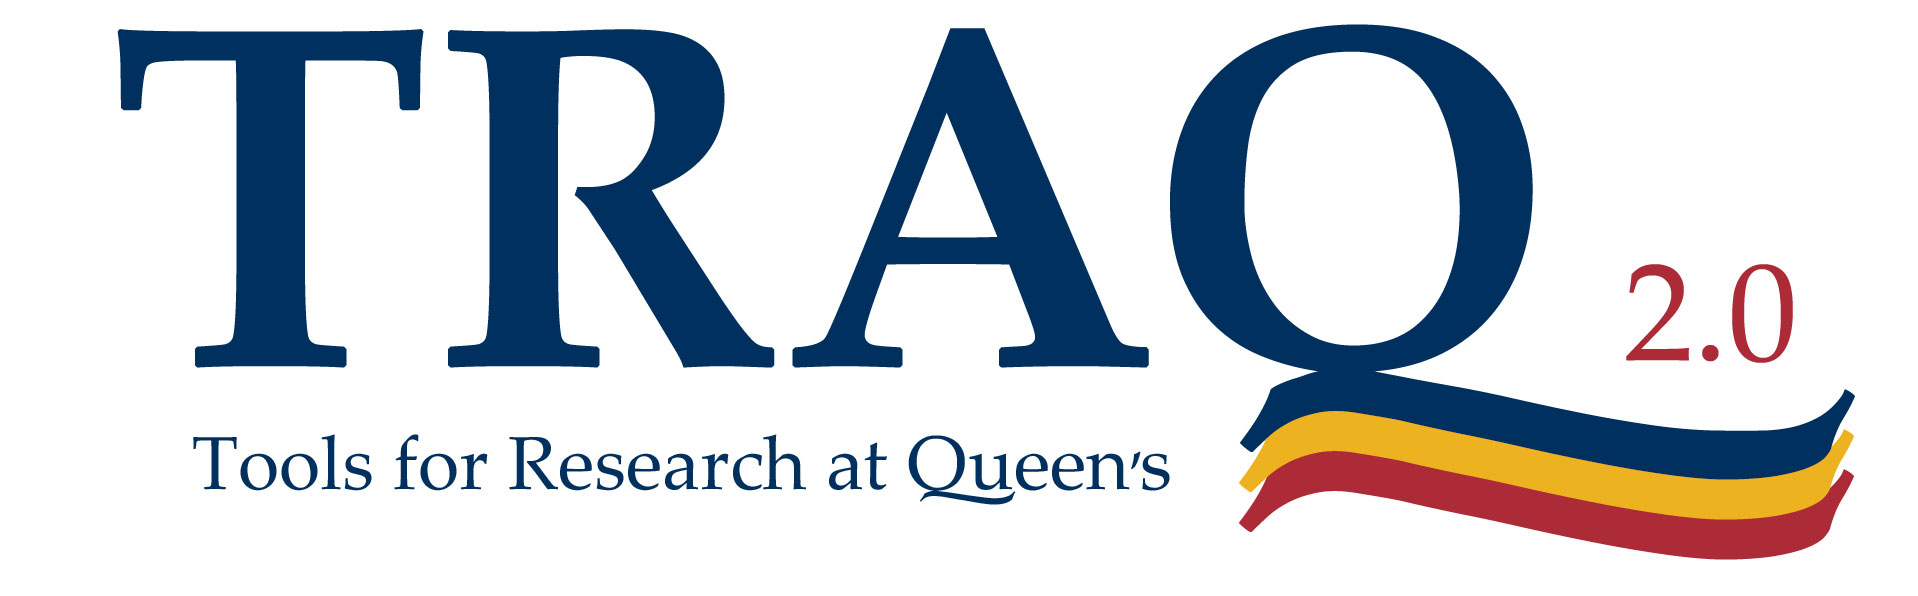 Tools for Research at Queen's 2.0 wordmark logo